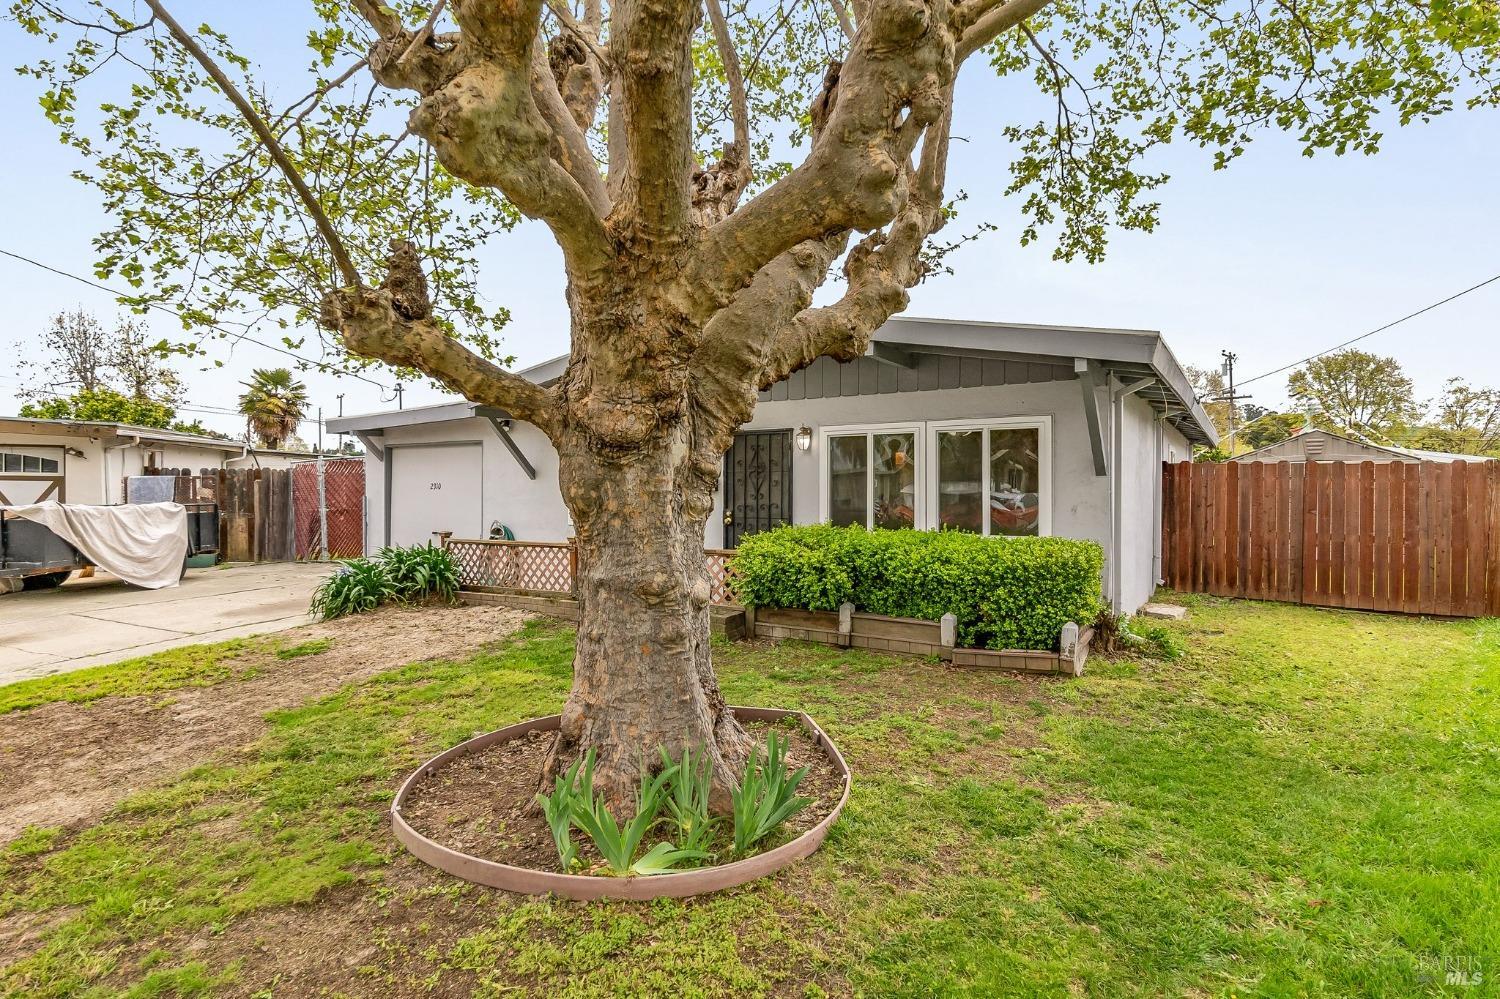 Photo of 2310 Tennent Ct in Pinole, CA